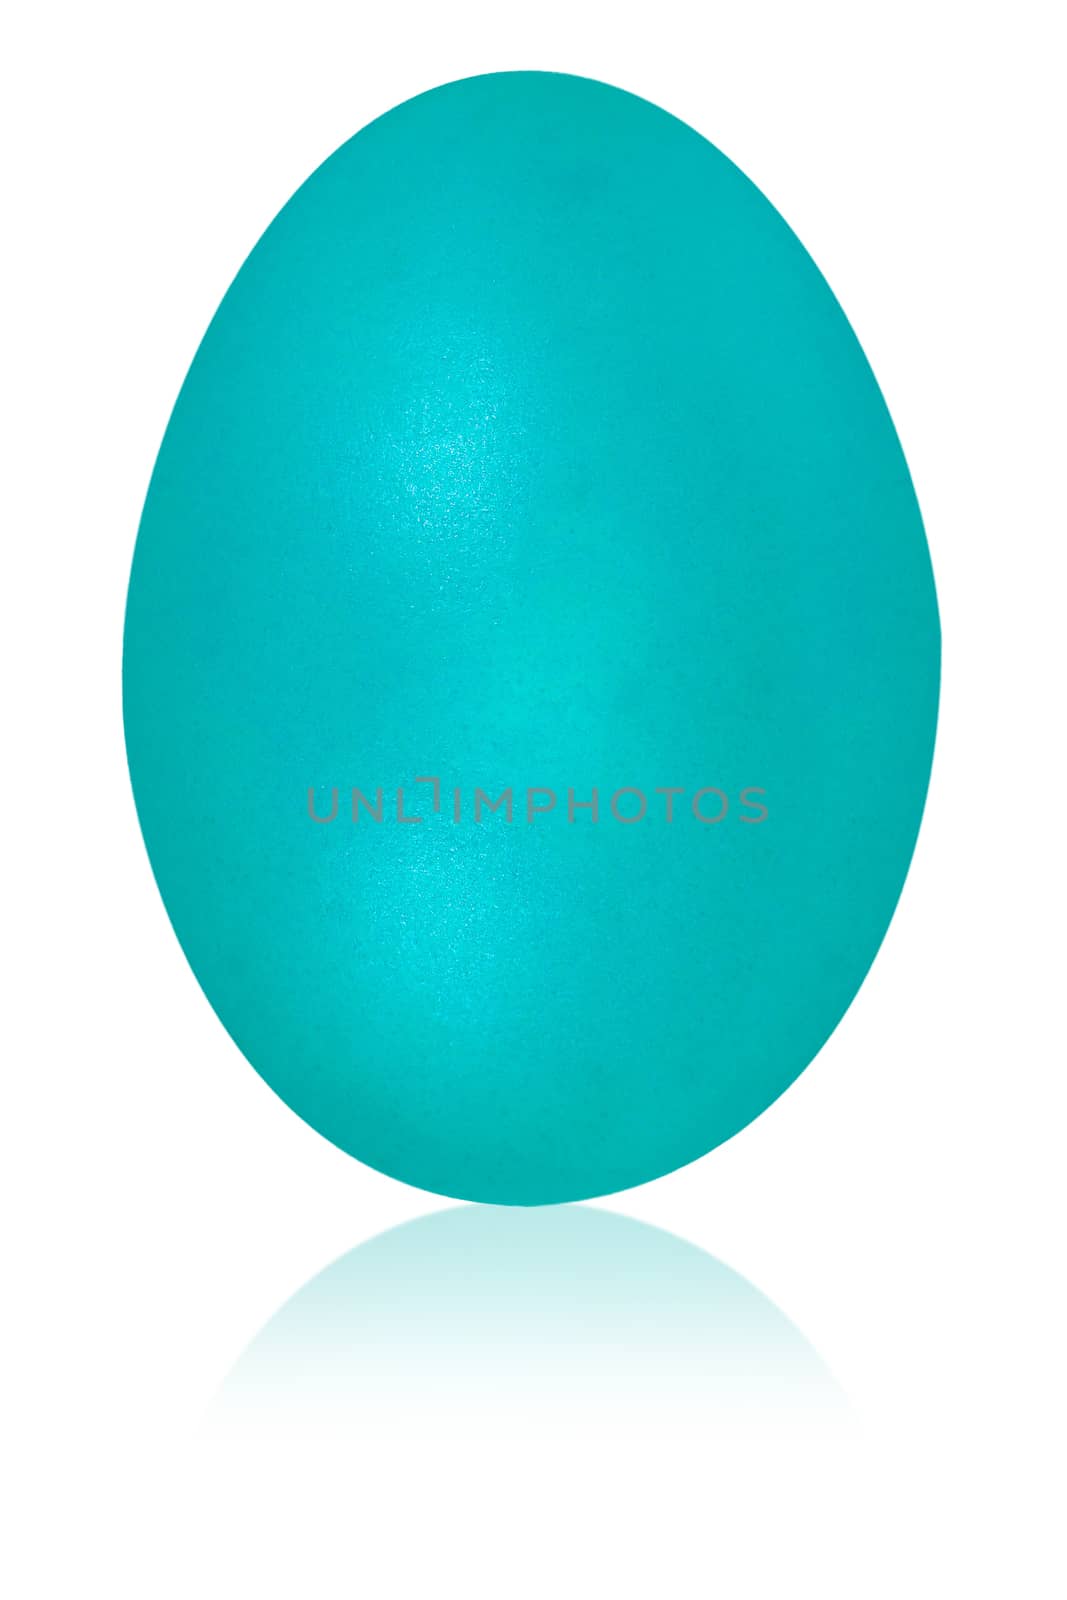 bright  turquoise blue egg by fadeinphotography